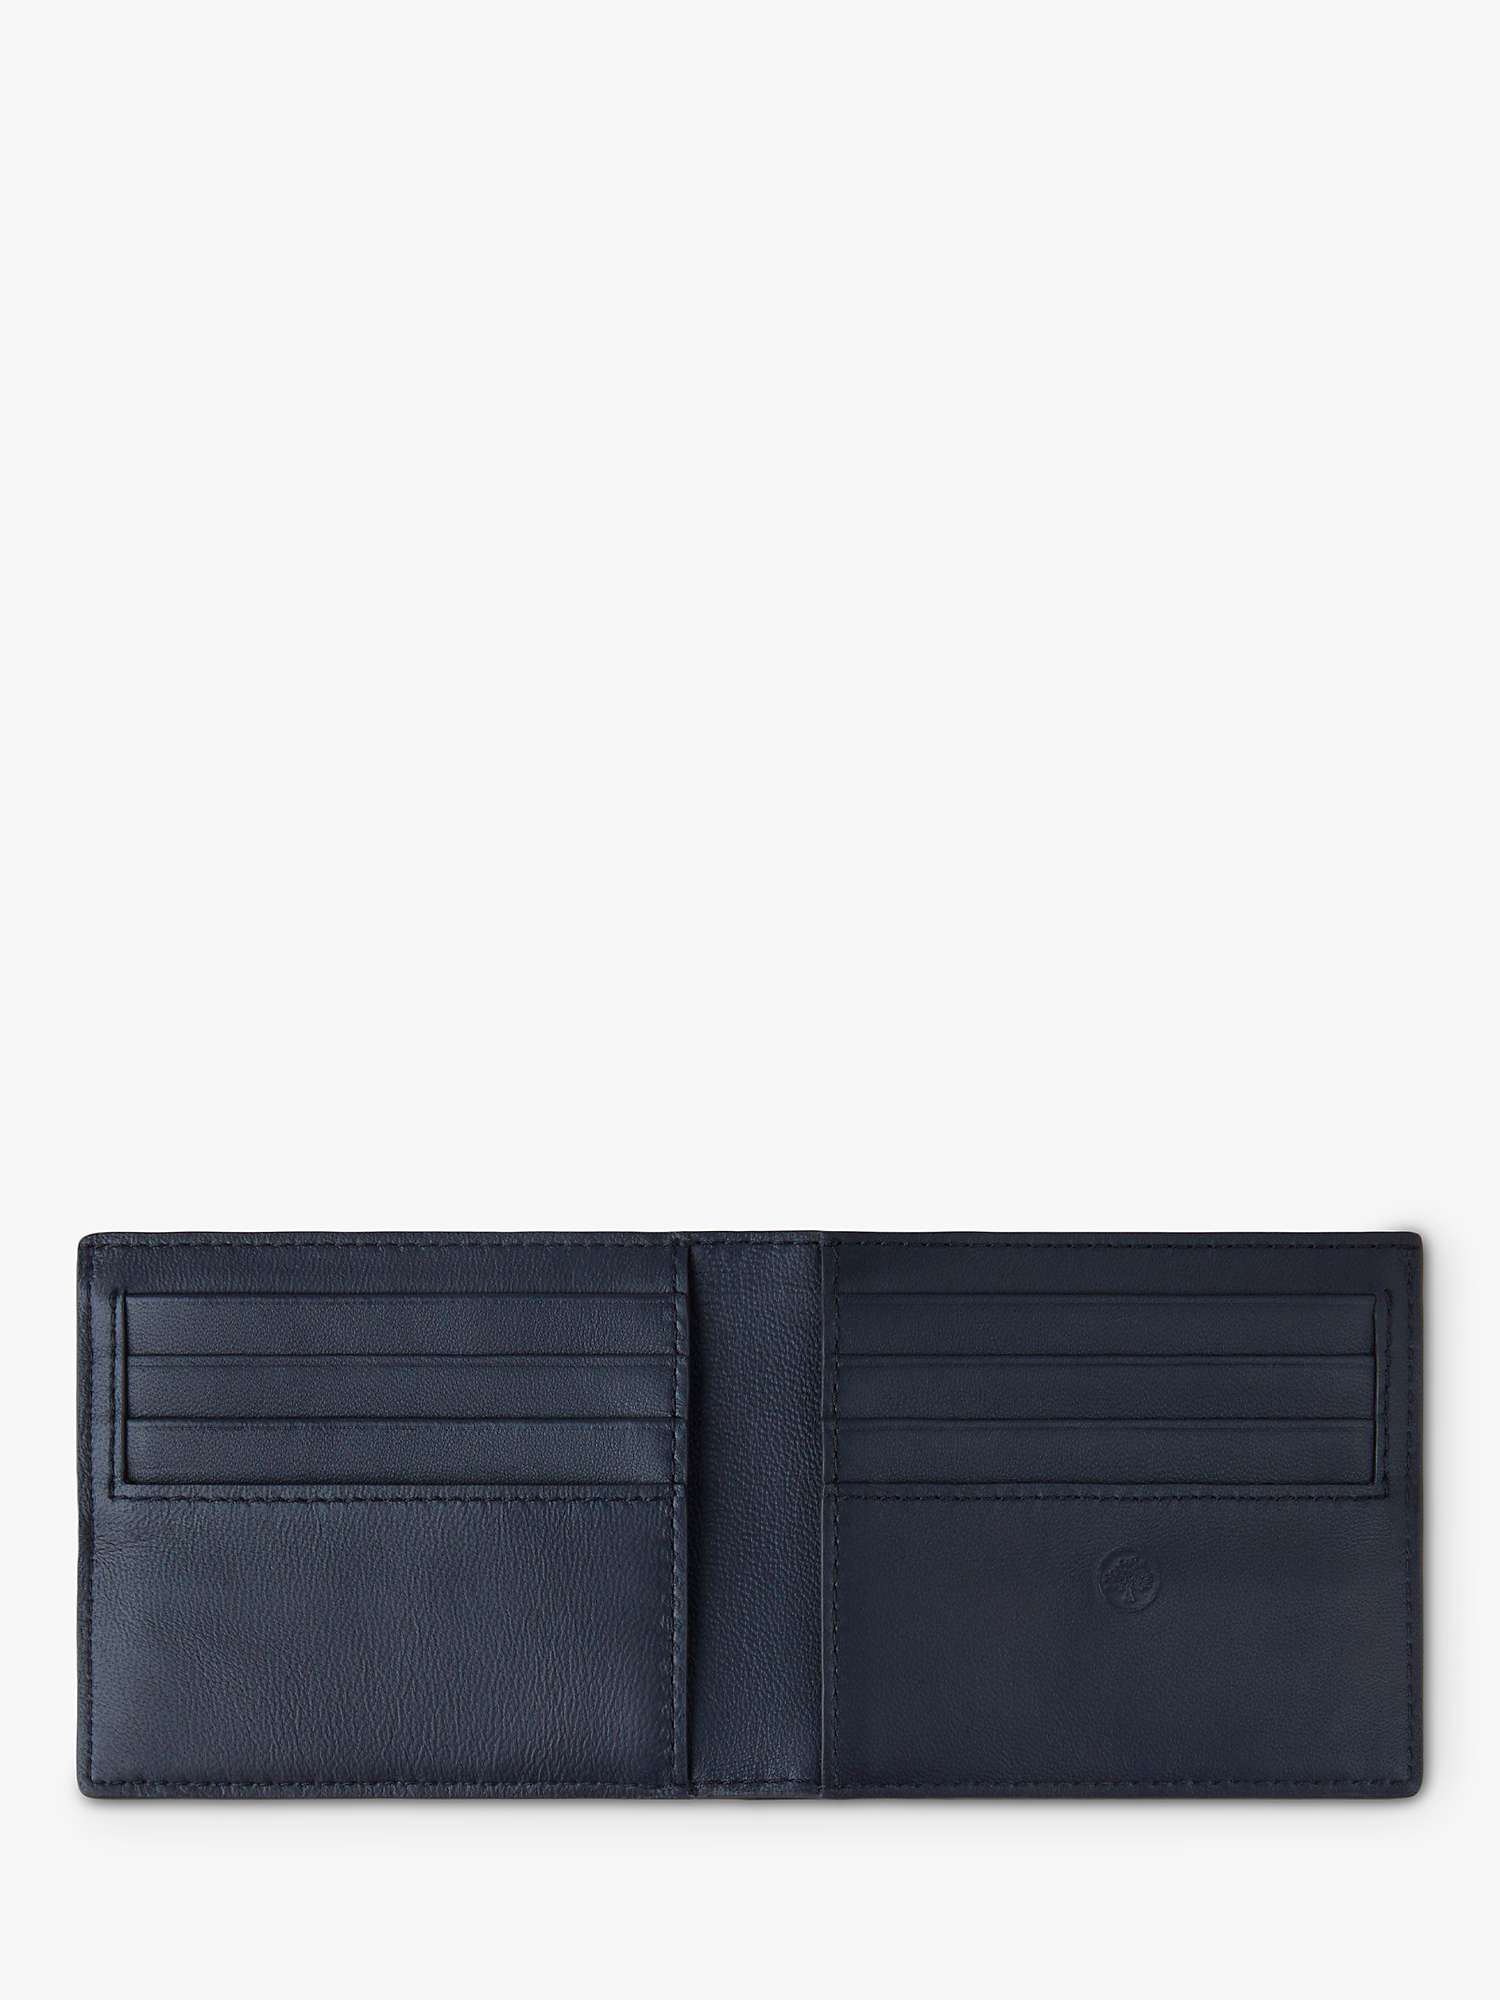 Buy Mulberry Eight Card Heavy Grain Leather Wallet Online at johnlewis.com